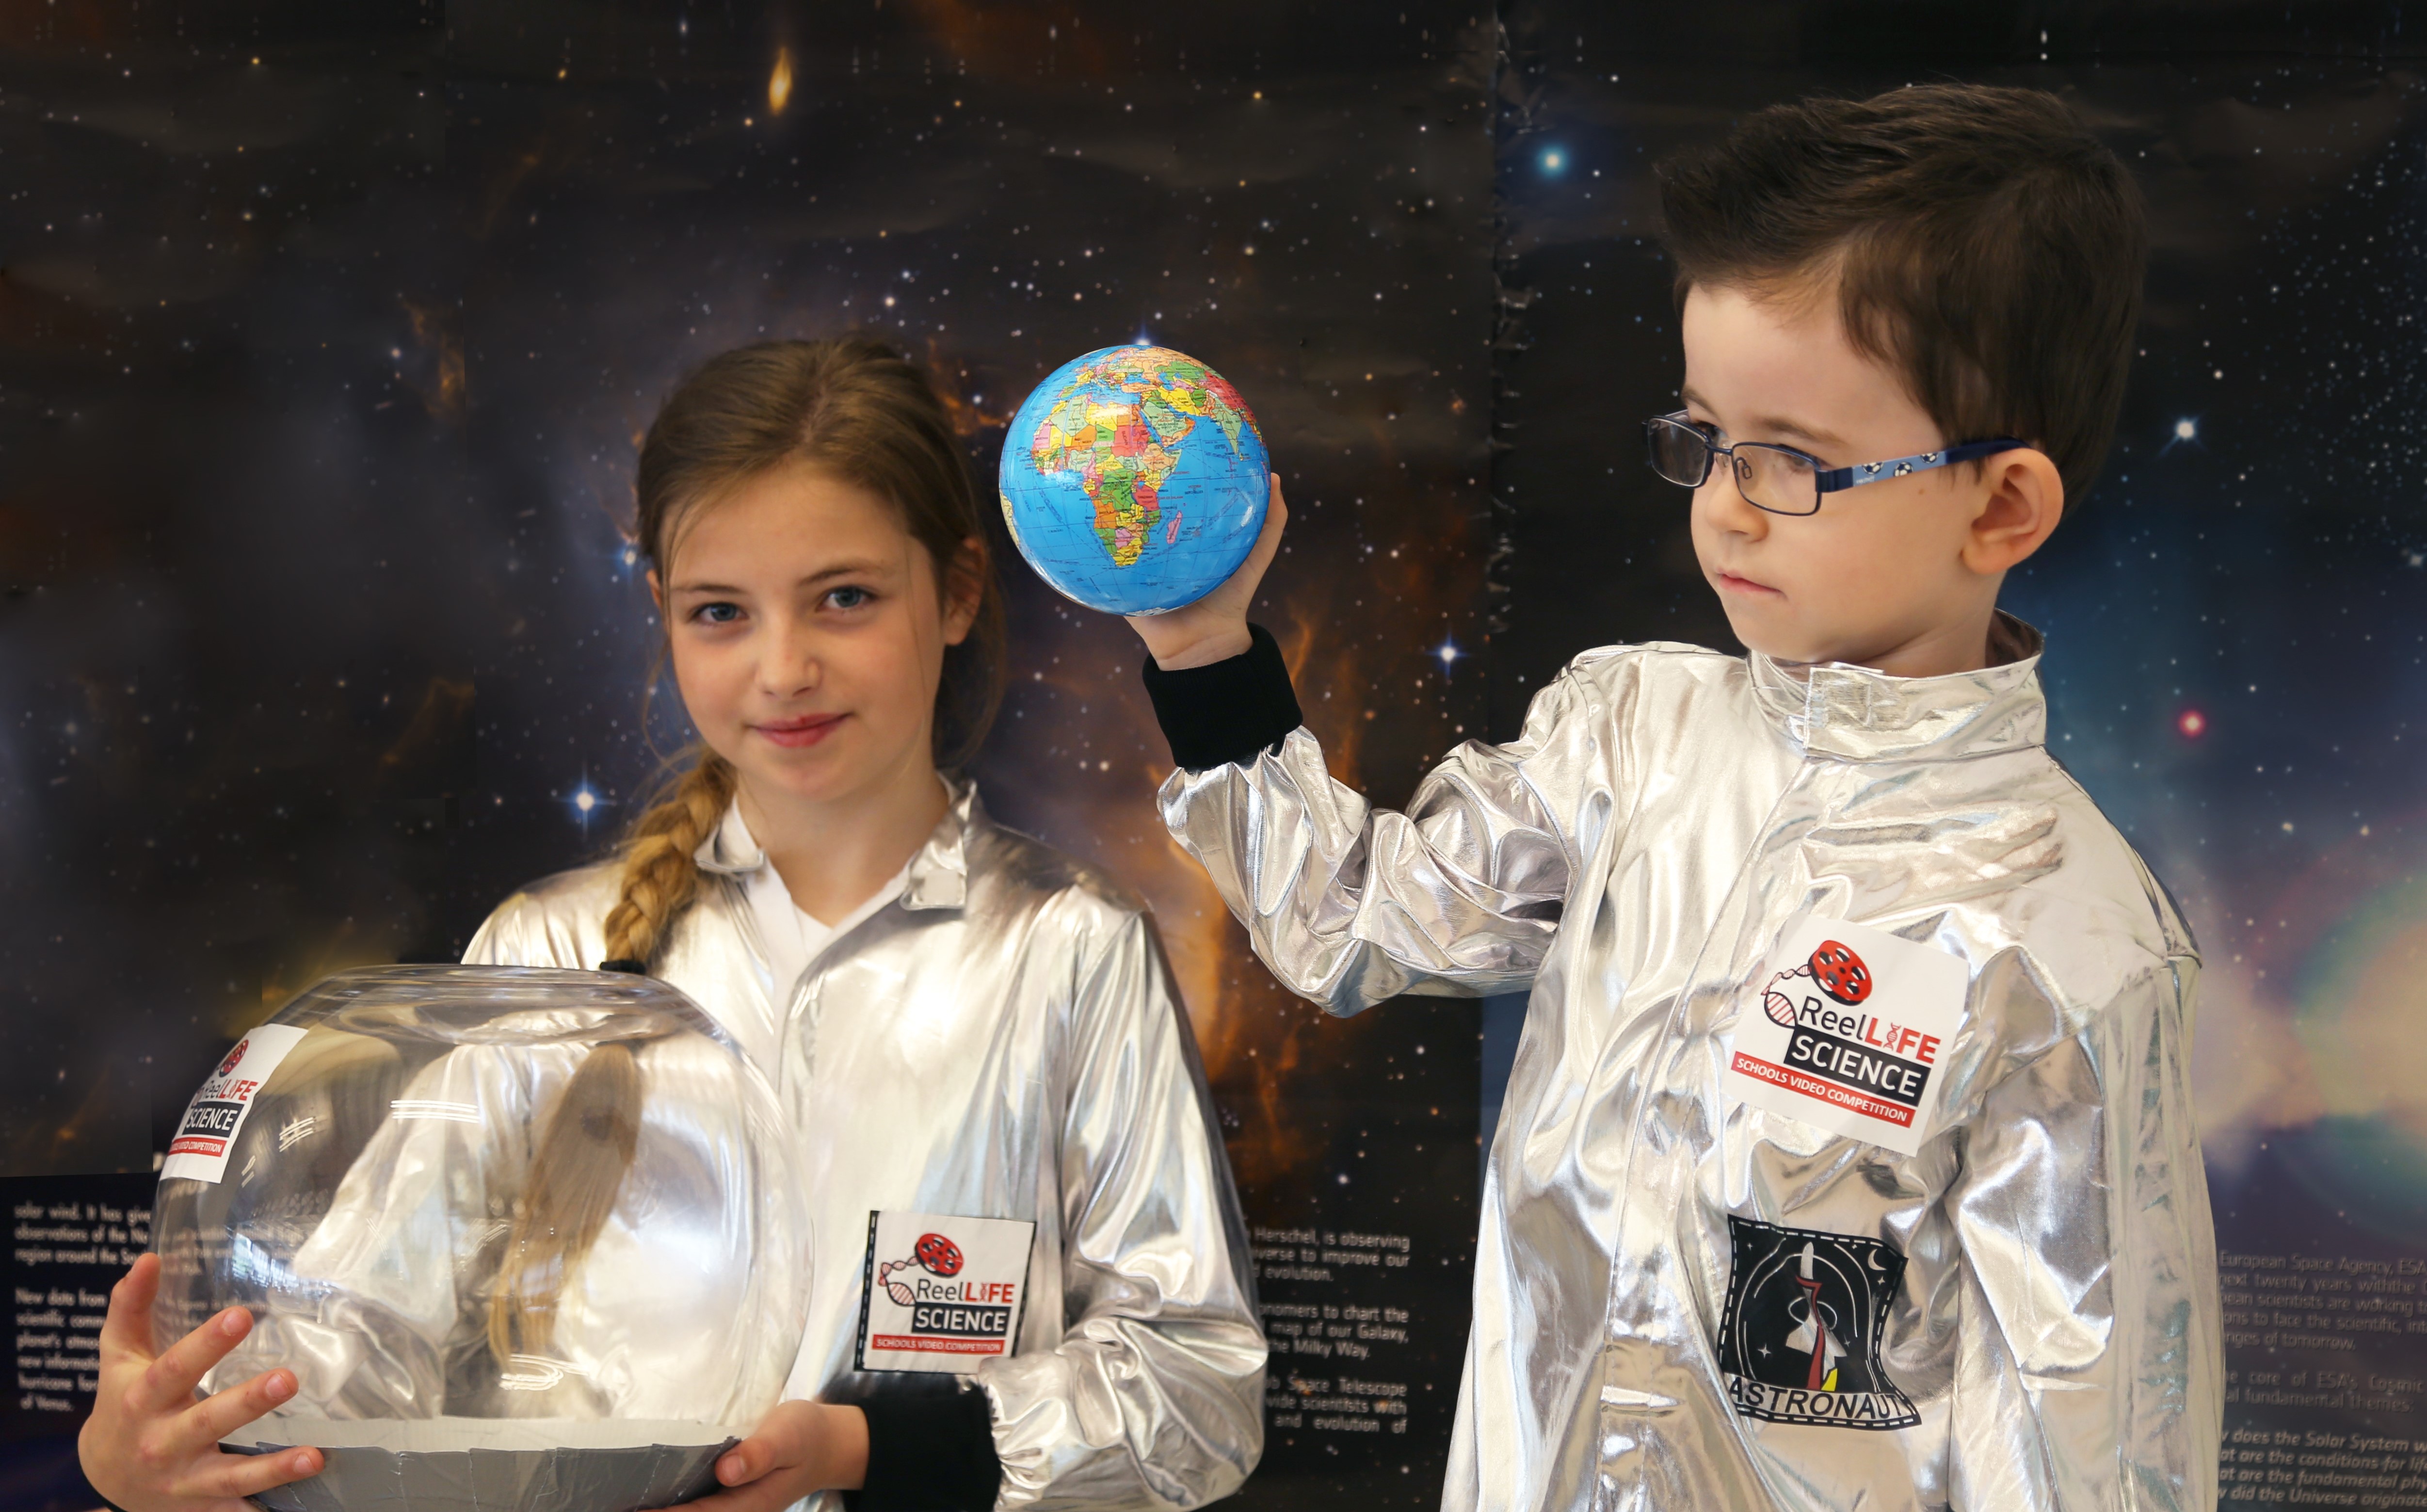 School-age scientists urged to take part in ReelLIFE SCIENCE